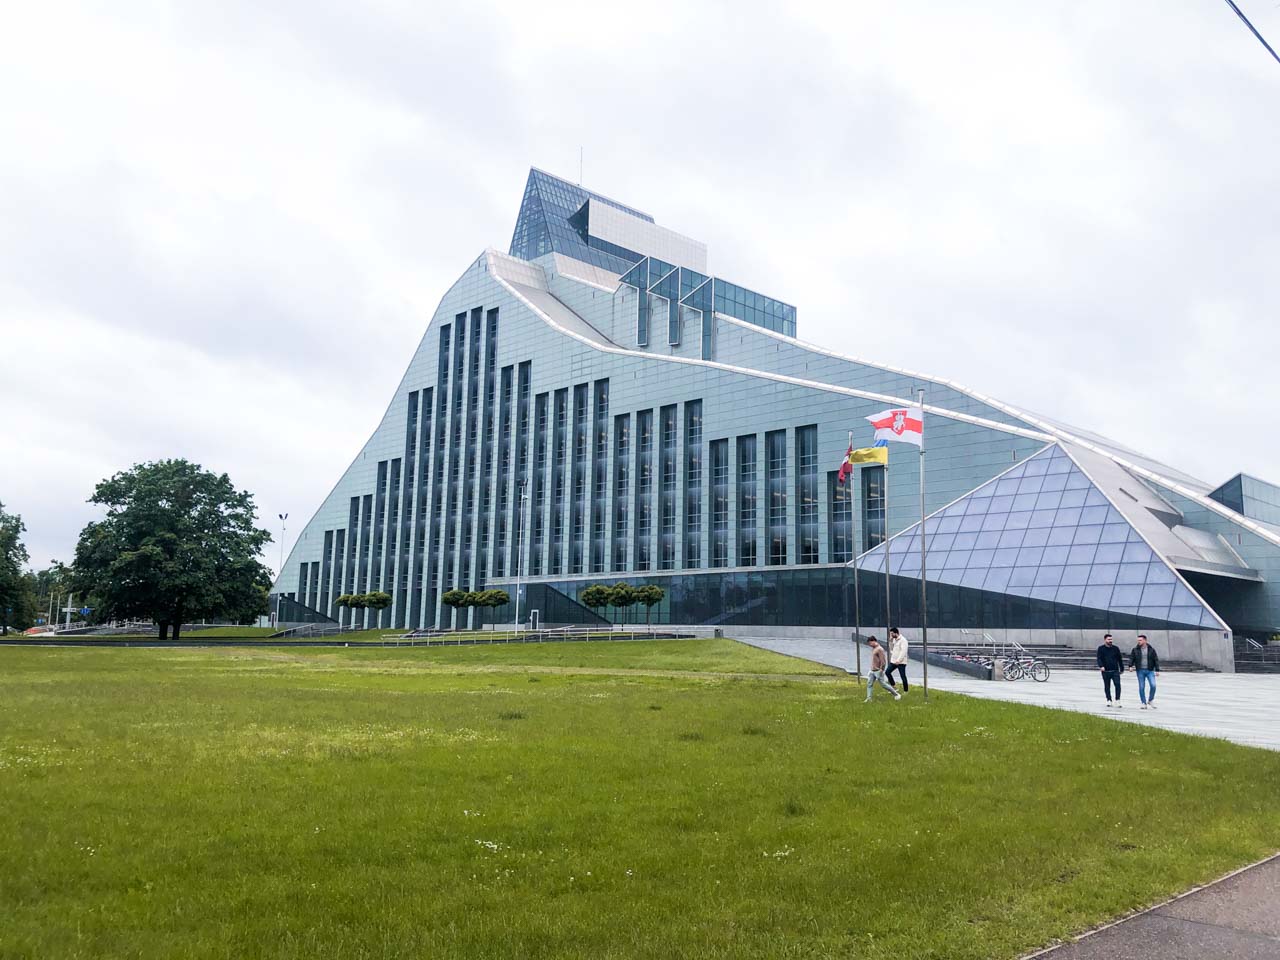 The National Library of Latvia